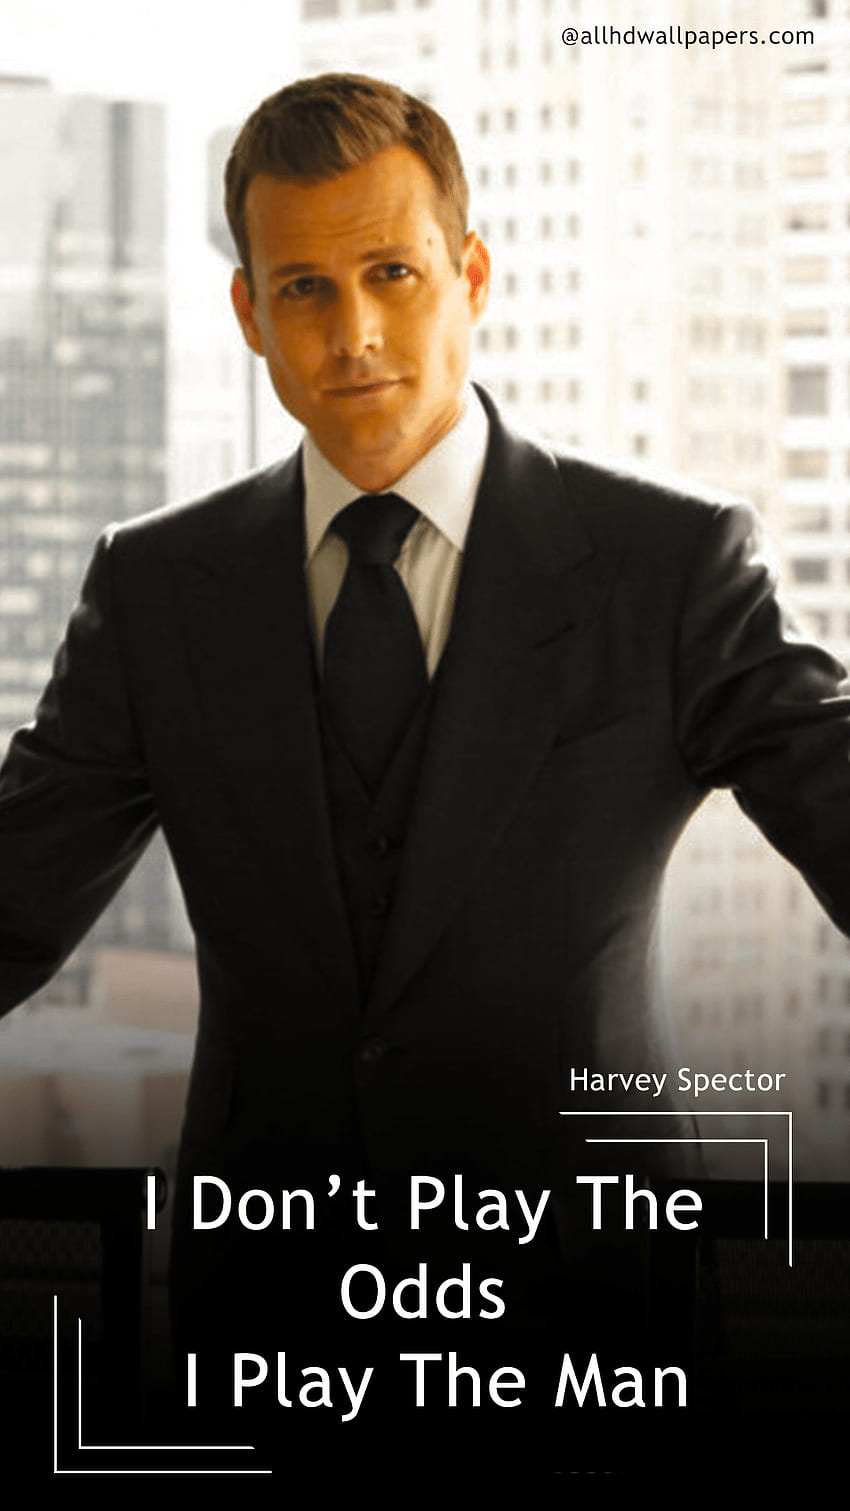 Suits How did Gabriel Macht influence the character of Harvey Specter   TV  Radio  Showbiz  TV  Expresscouk